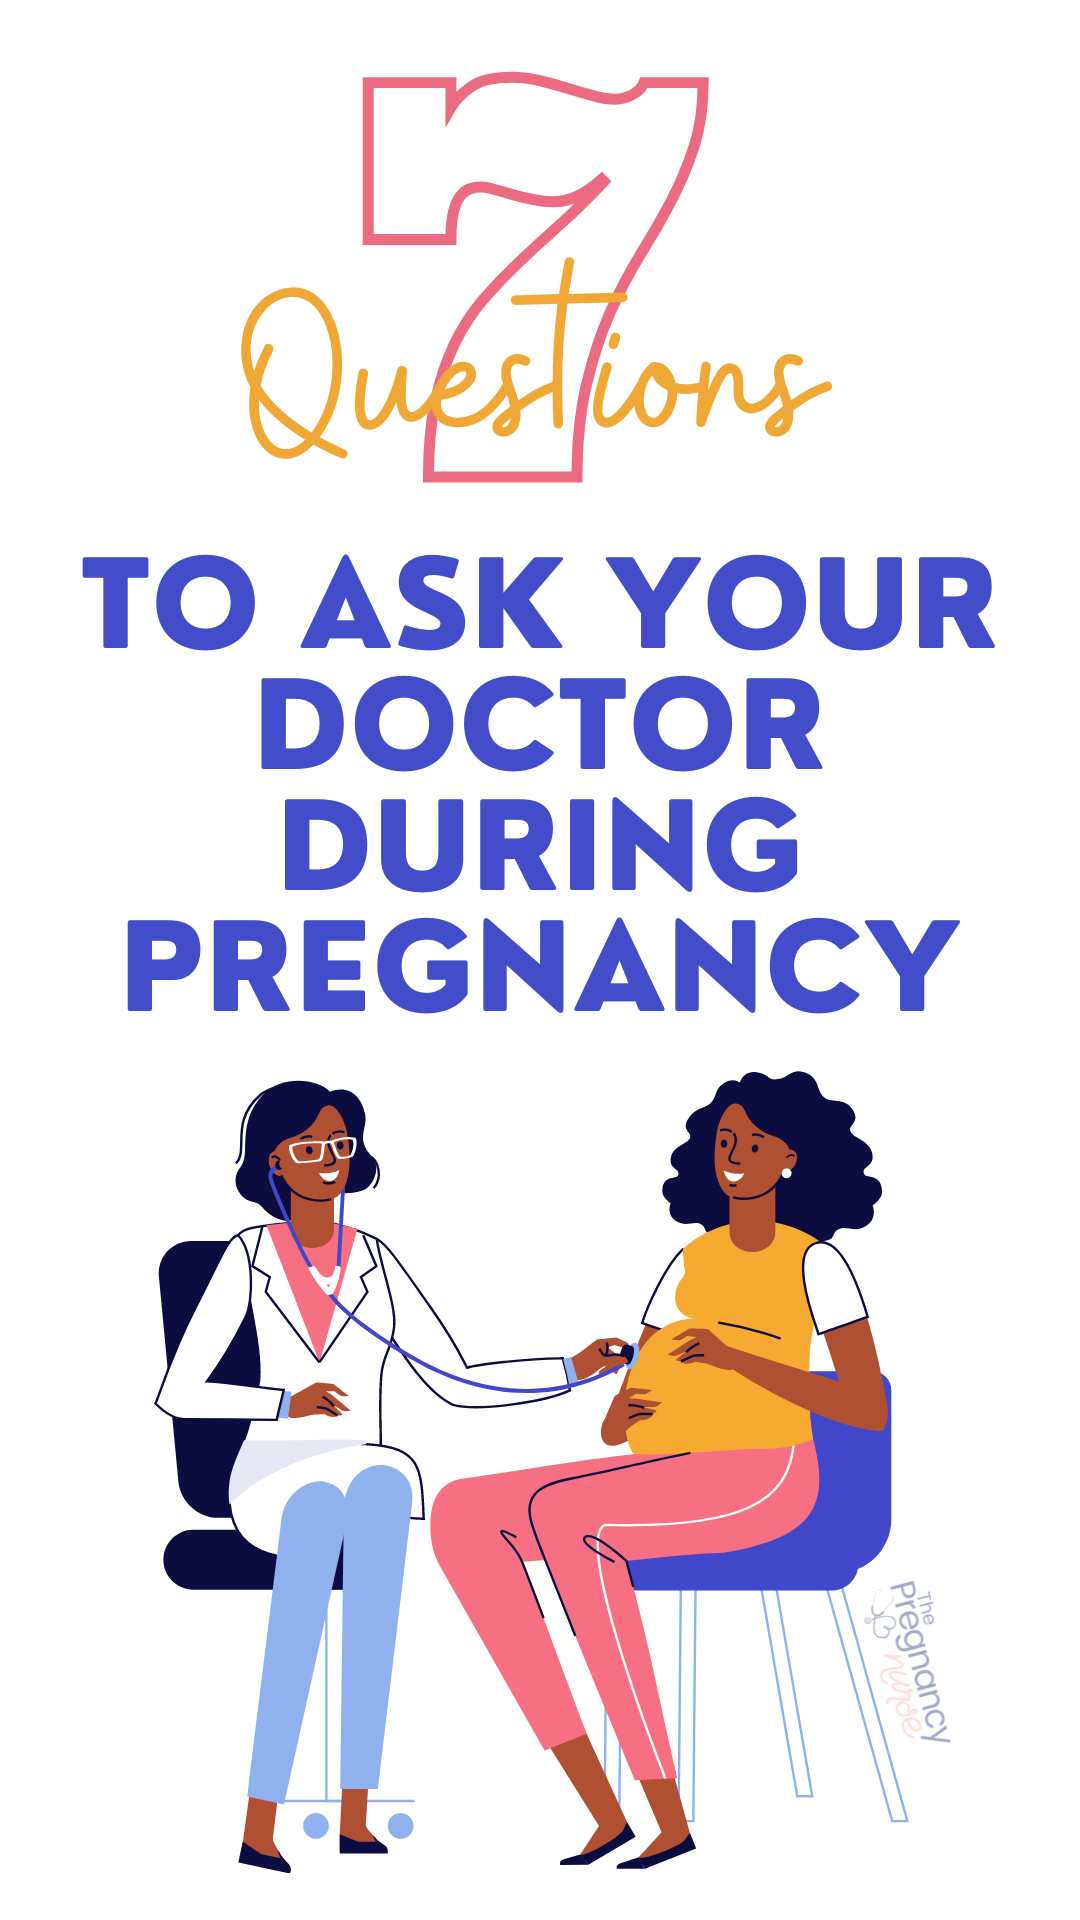 Are you pregnant and looking for the best questions to ask your ob-gyn? Look no further! We have all the questions you need to make sure your pregnancy is healthy and good for you and your baby. Start by asking your doctor about risks, nutrition, and prenatal care. With our help, your pregnancy will be smooth sailing!